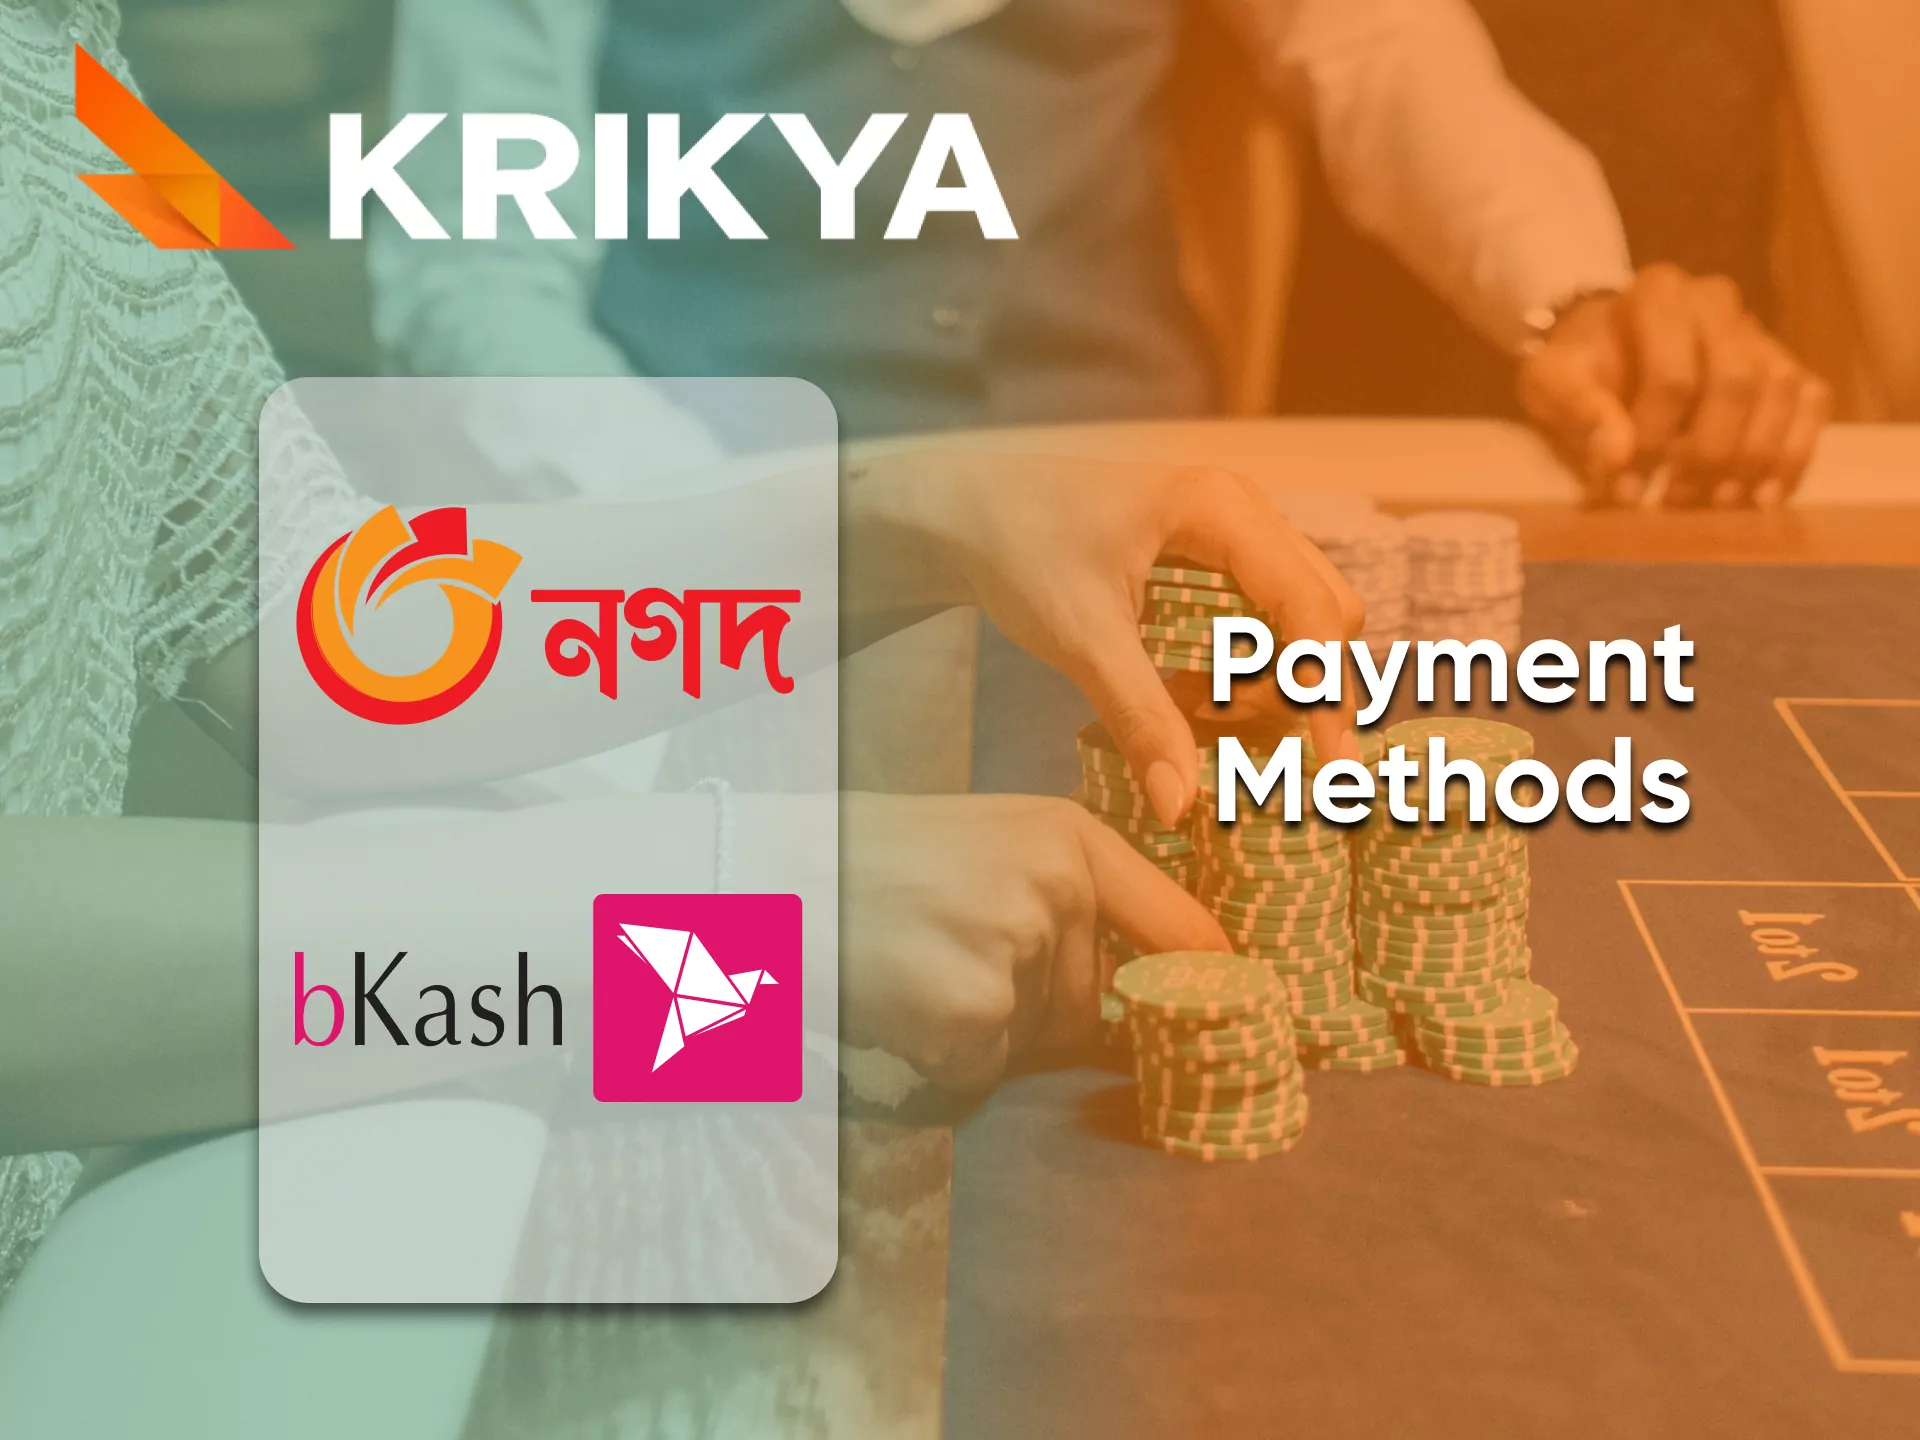 By replenishing funds, you get the opportunity to play at Krikya Casino.